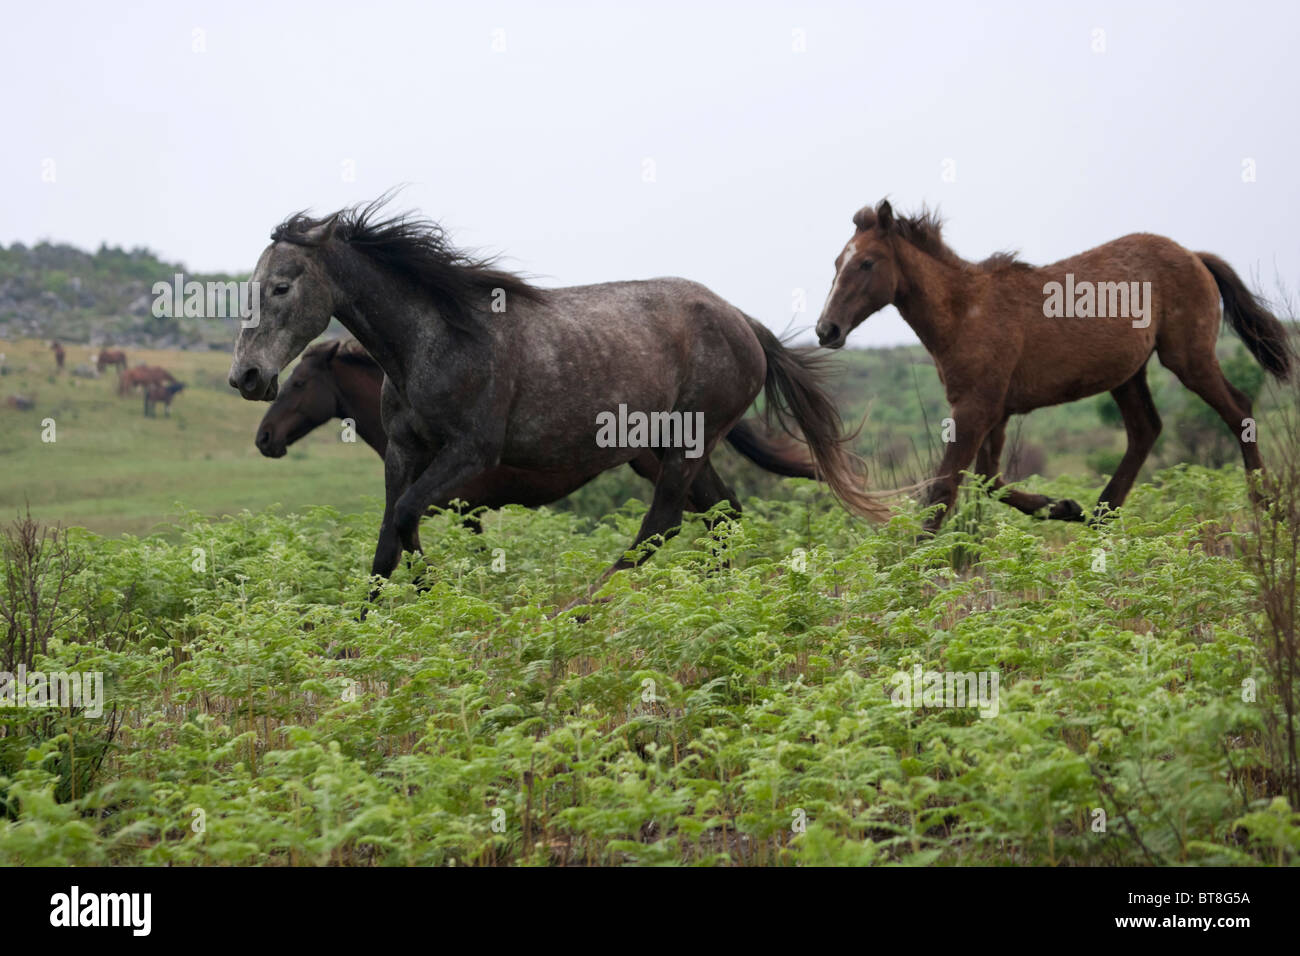 South Africa Wild Feral Animal Horse Nature Stock Photo